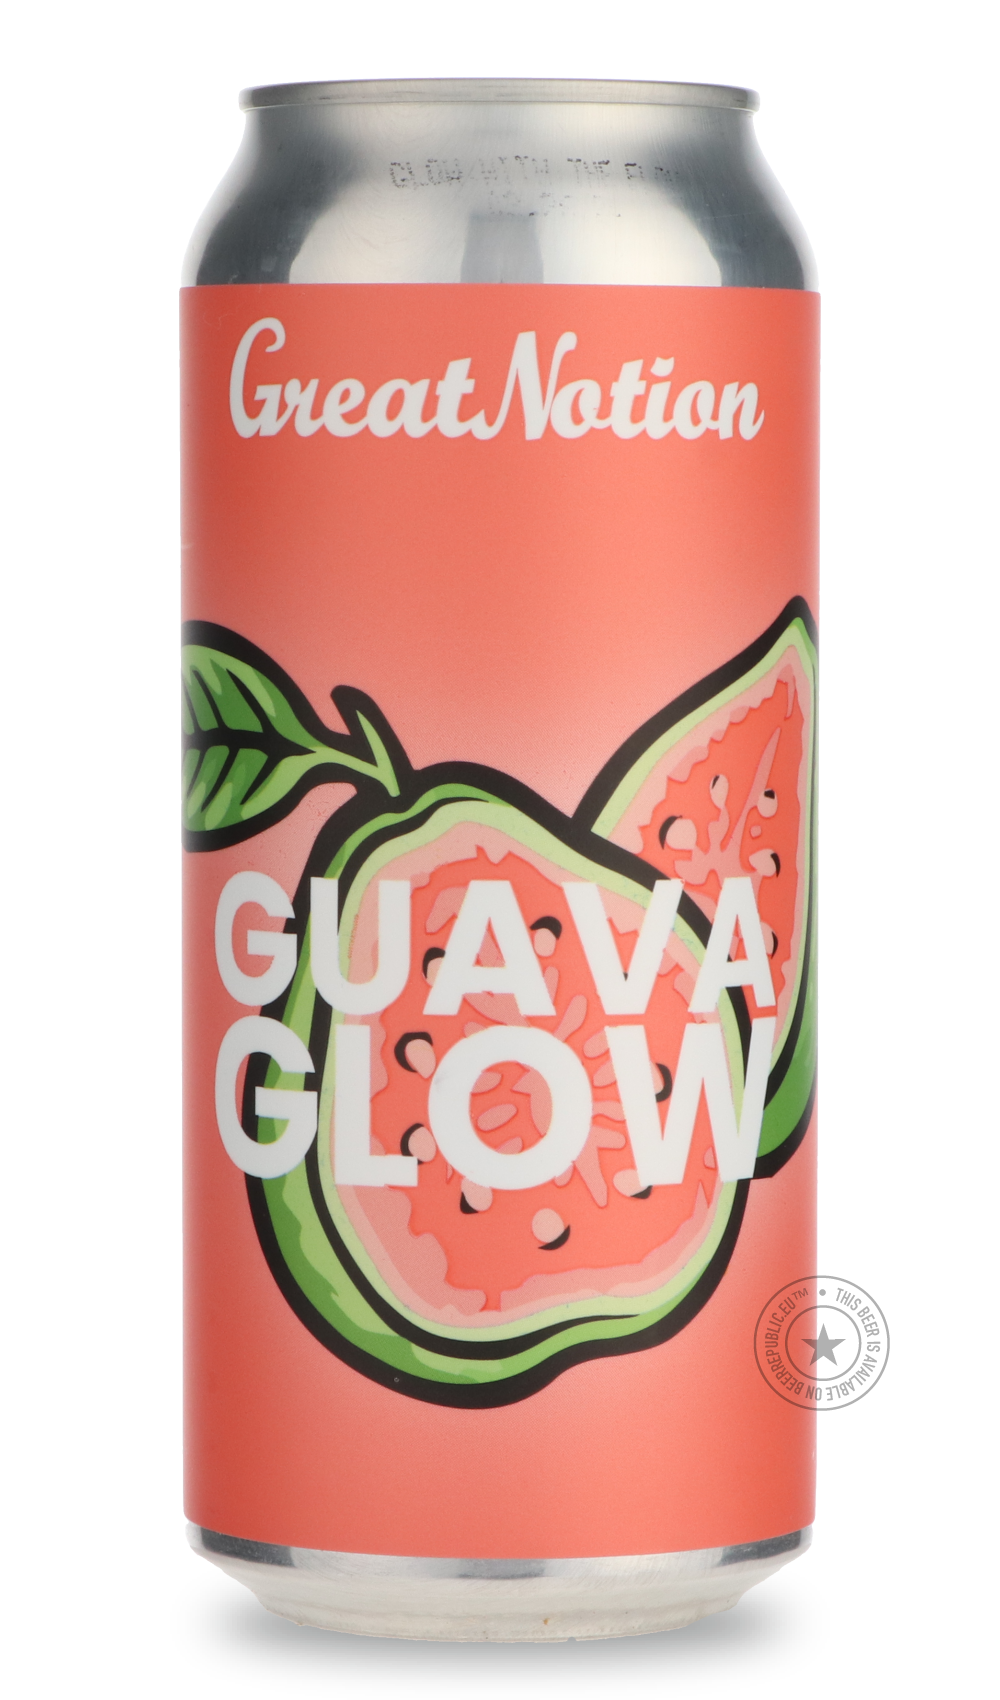 -Great Notion- Guava Glow-Sour / Wild & Fruity- Only @ Beer Republic - The best online beer store for American & Canadian craft beer - Buy beer online from the USA and Canada - Bier online kopen - Amerikaans bier kopen - Craft beer store - Craft beer kopen - Amerikanisch bier kaufen - Bier online kaufen - Acheter biere online - IPA - Stout - Porter - New England IPA - Hazy IPA - Imperial Stout - Barrel Aged - Barrel Aged Imperial Stout - Brown - Dark beer - Blond - Blonde - Pilsner - Lager - Wheat - Weizen 